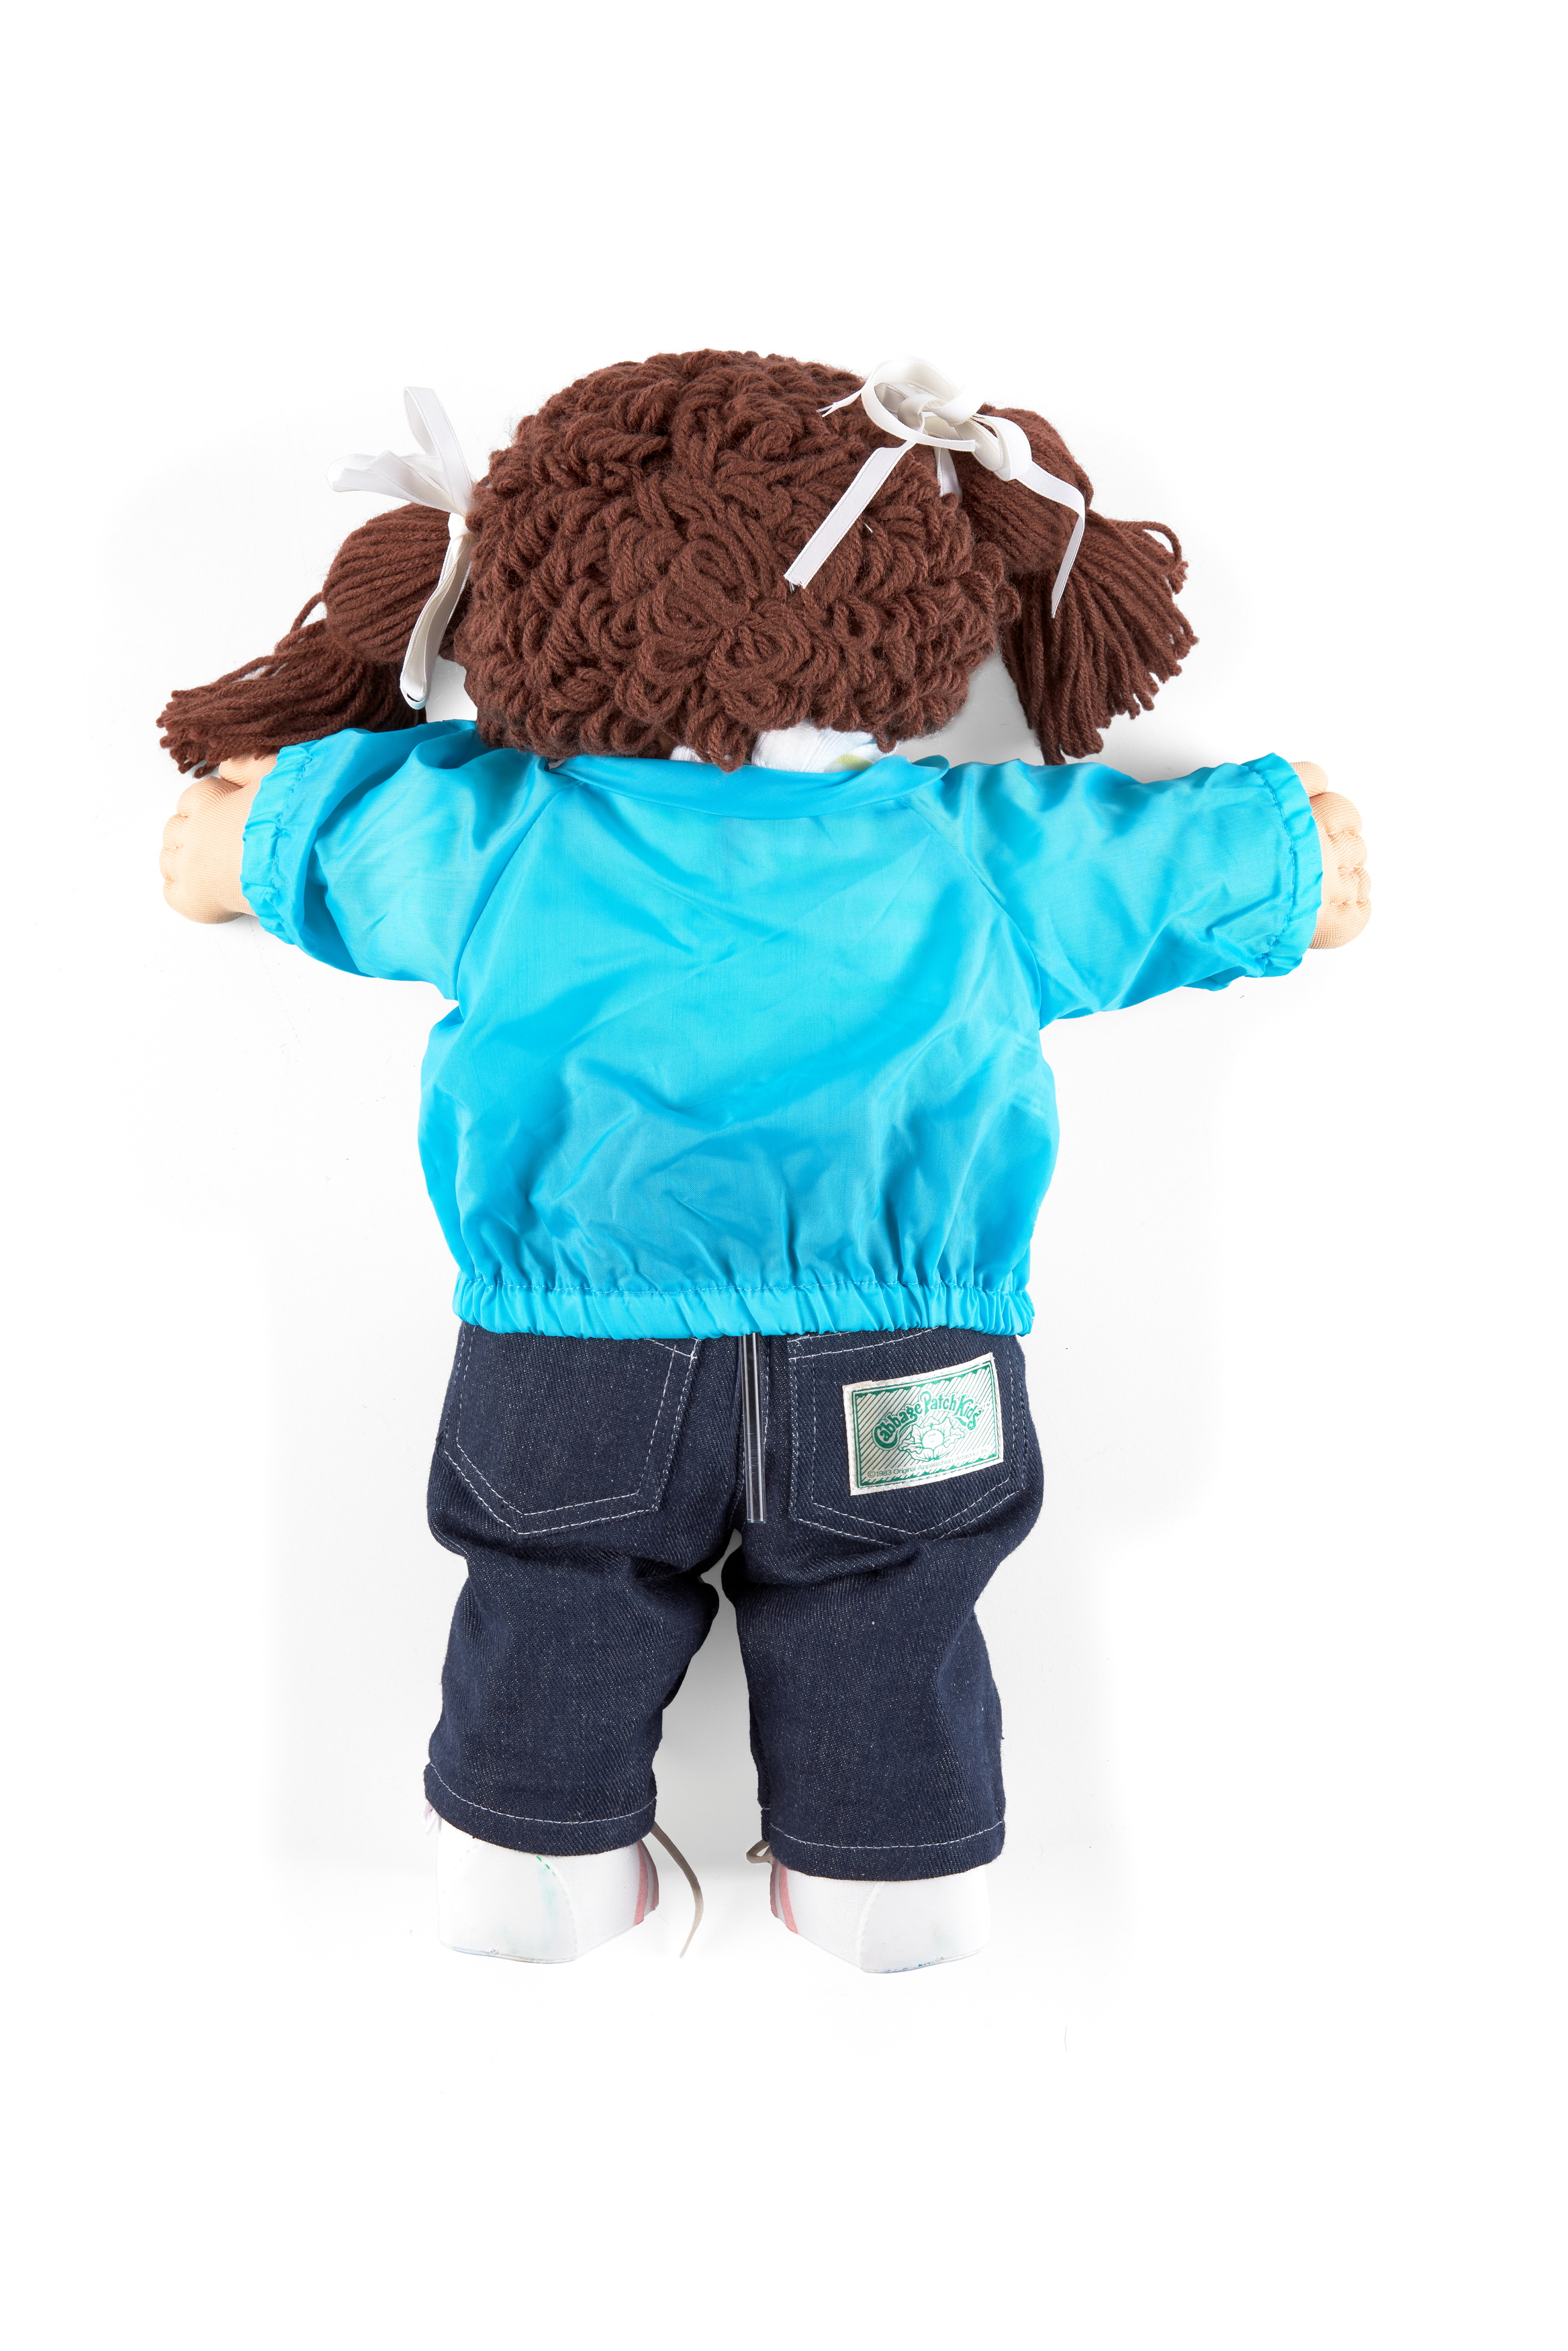 'Cabbage Patch Kid' doll byToltoys